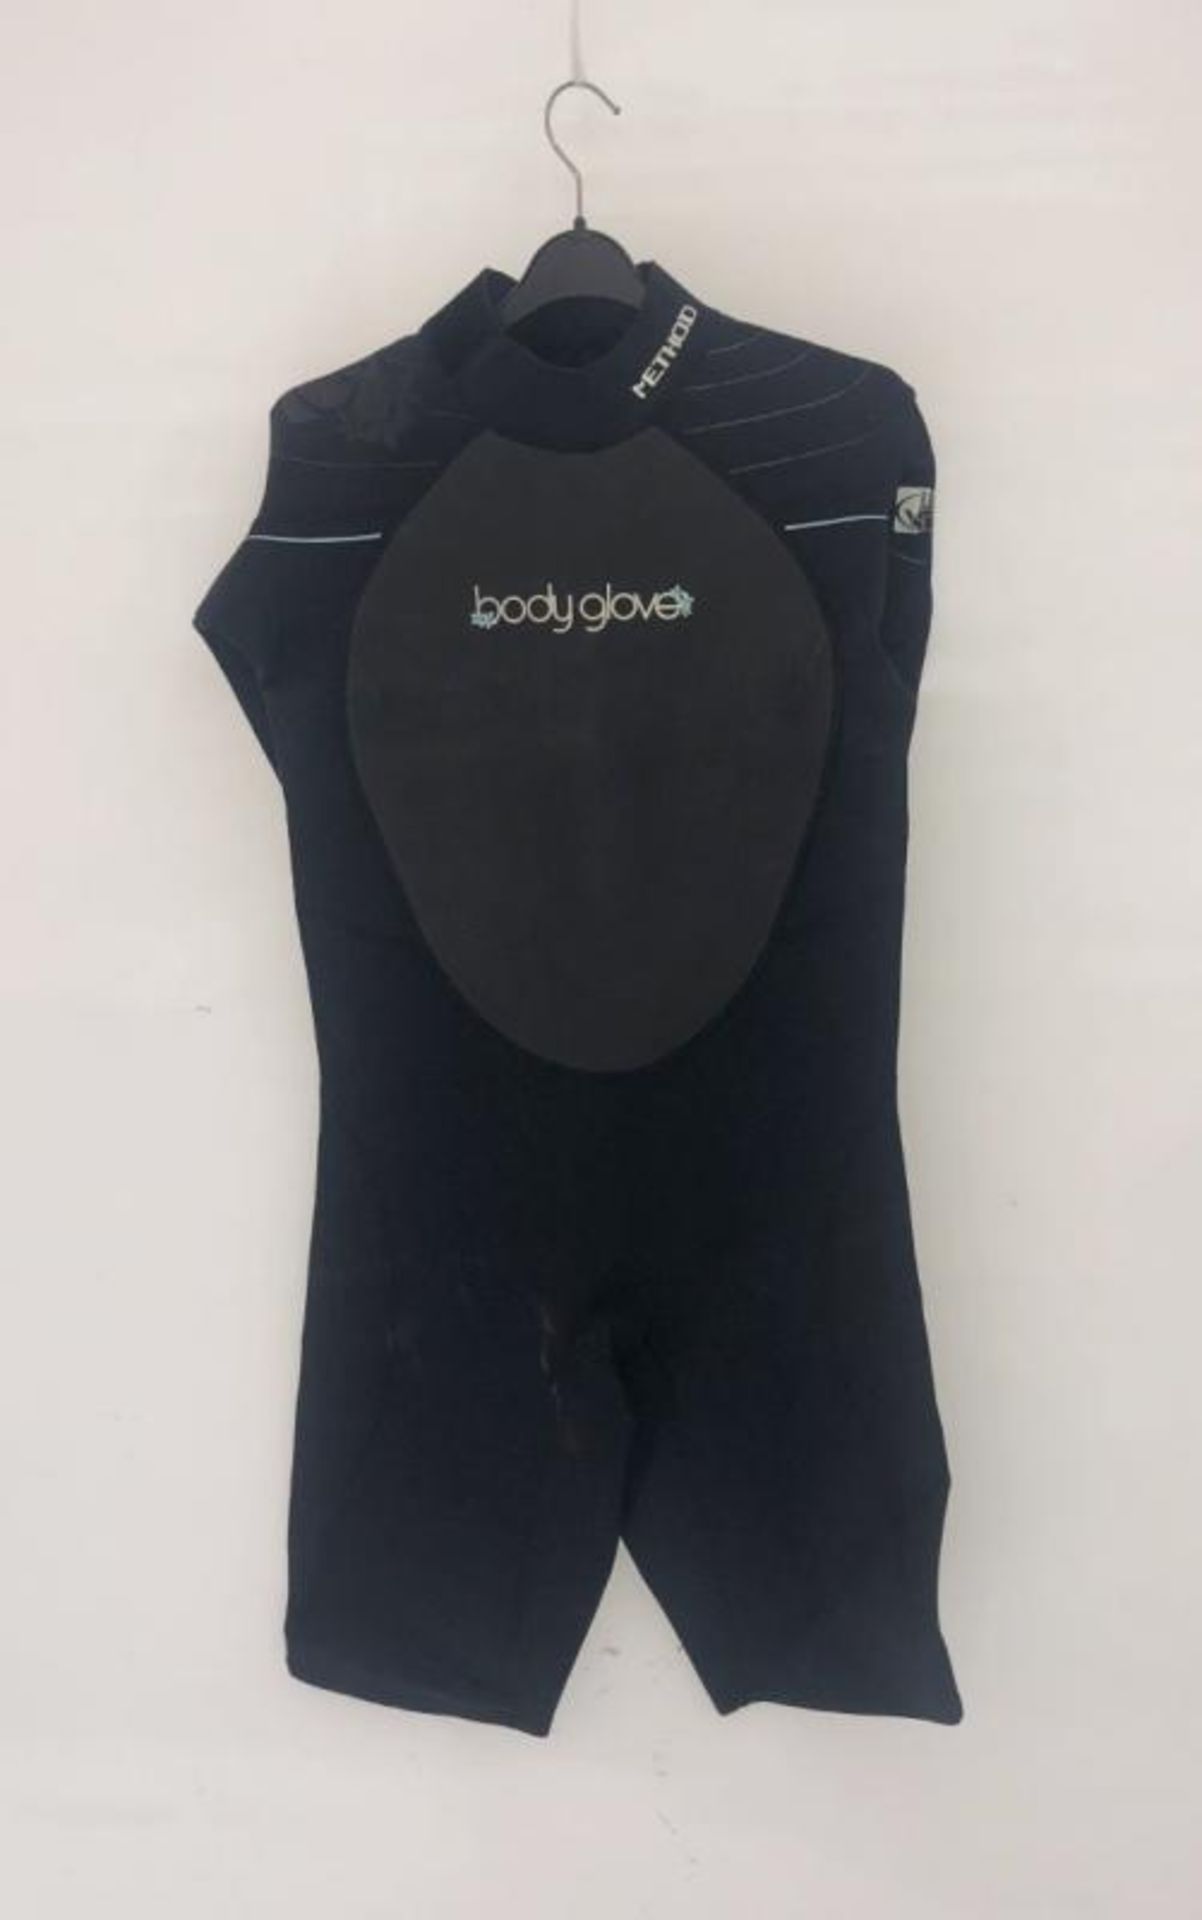 4 x New Body Glove Method Shortie Ladies Wetsuit's - Ref RB136, RB137, RB138, NS485 - CL349 - Altri - Image 12 of 18